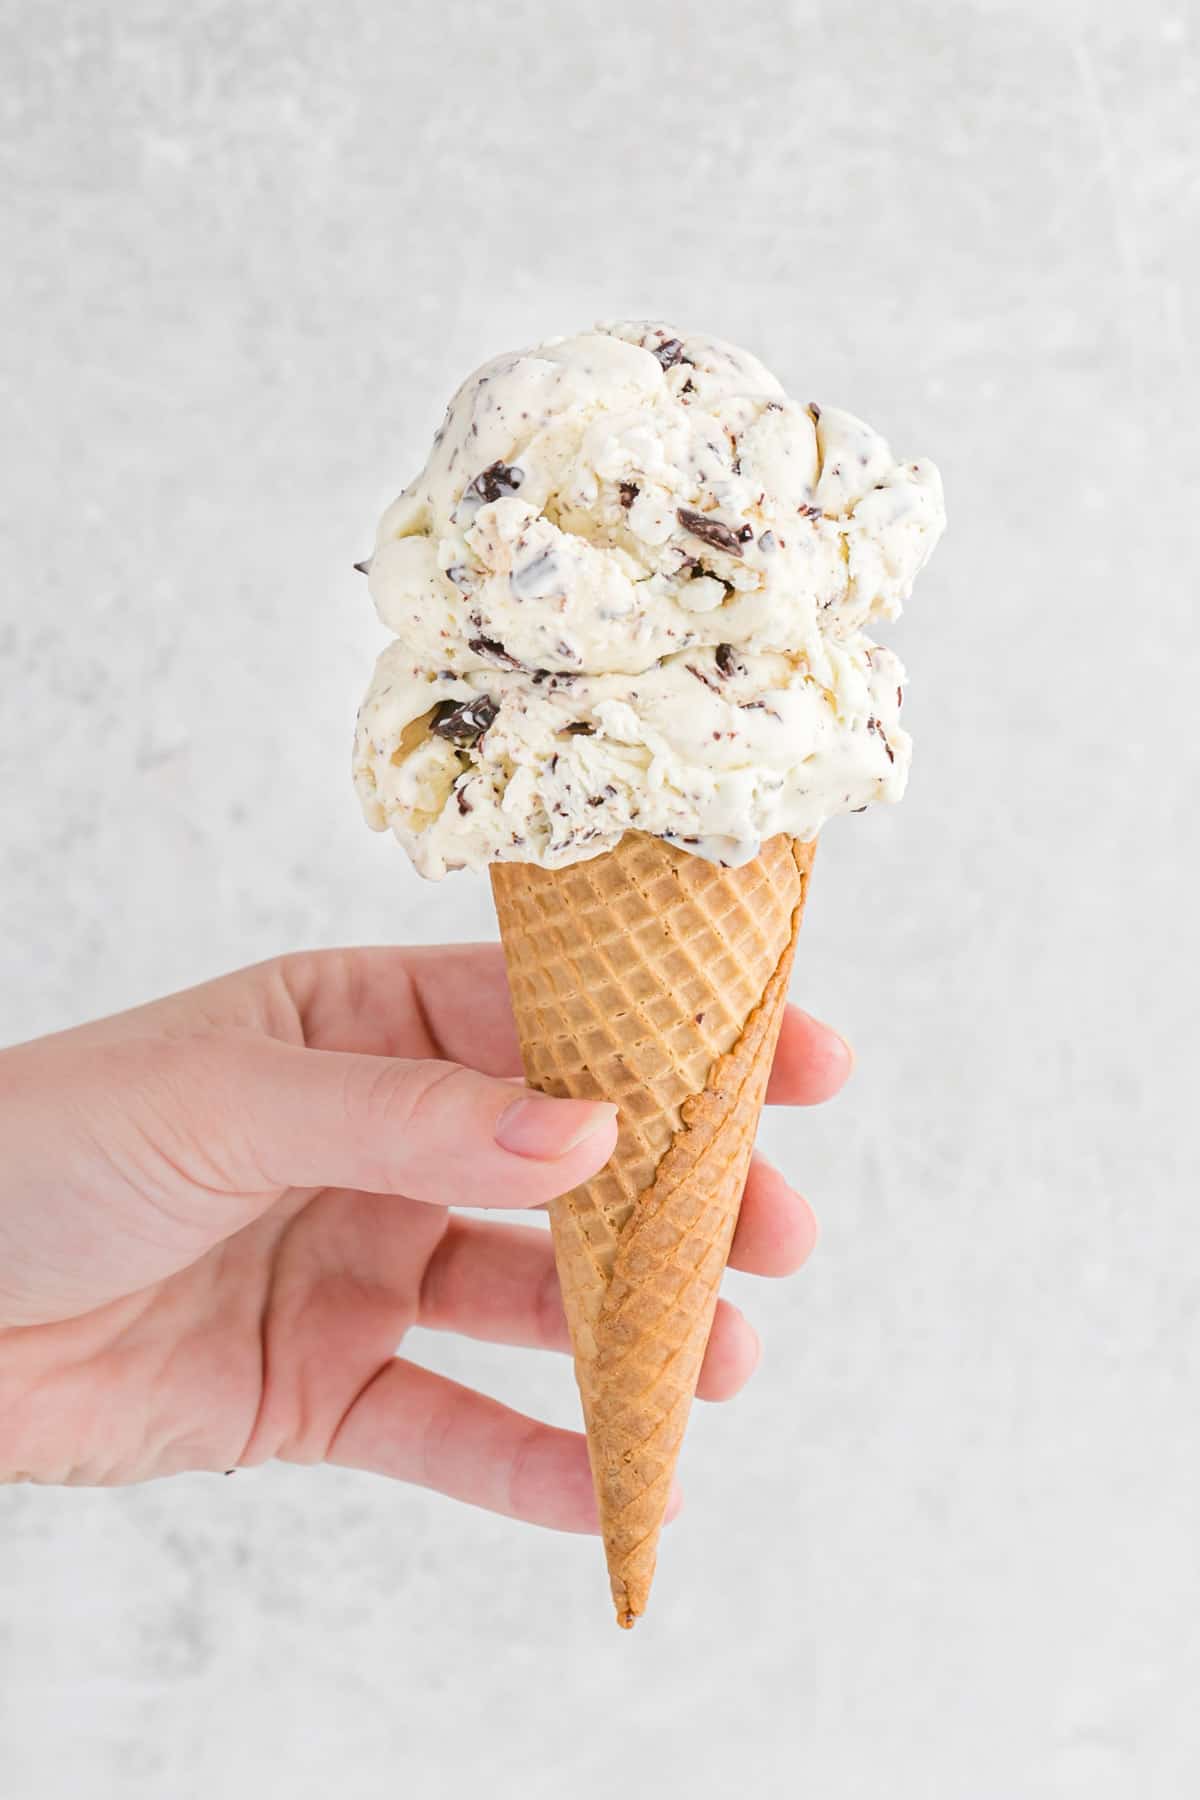 hand holding ice cream cone with 2 scoops of chocolate chip ice cream